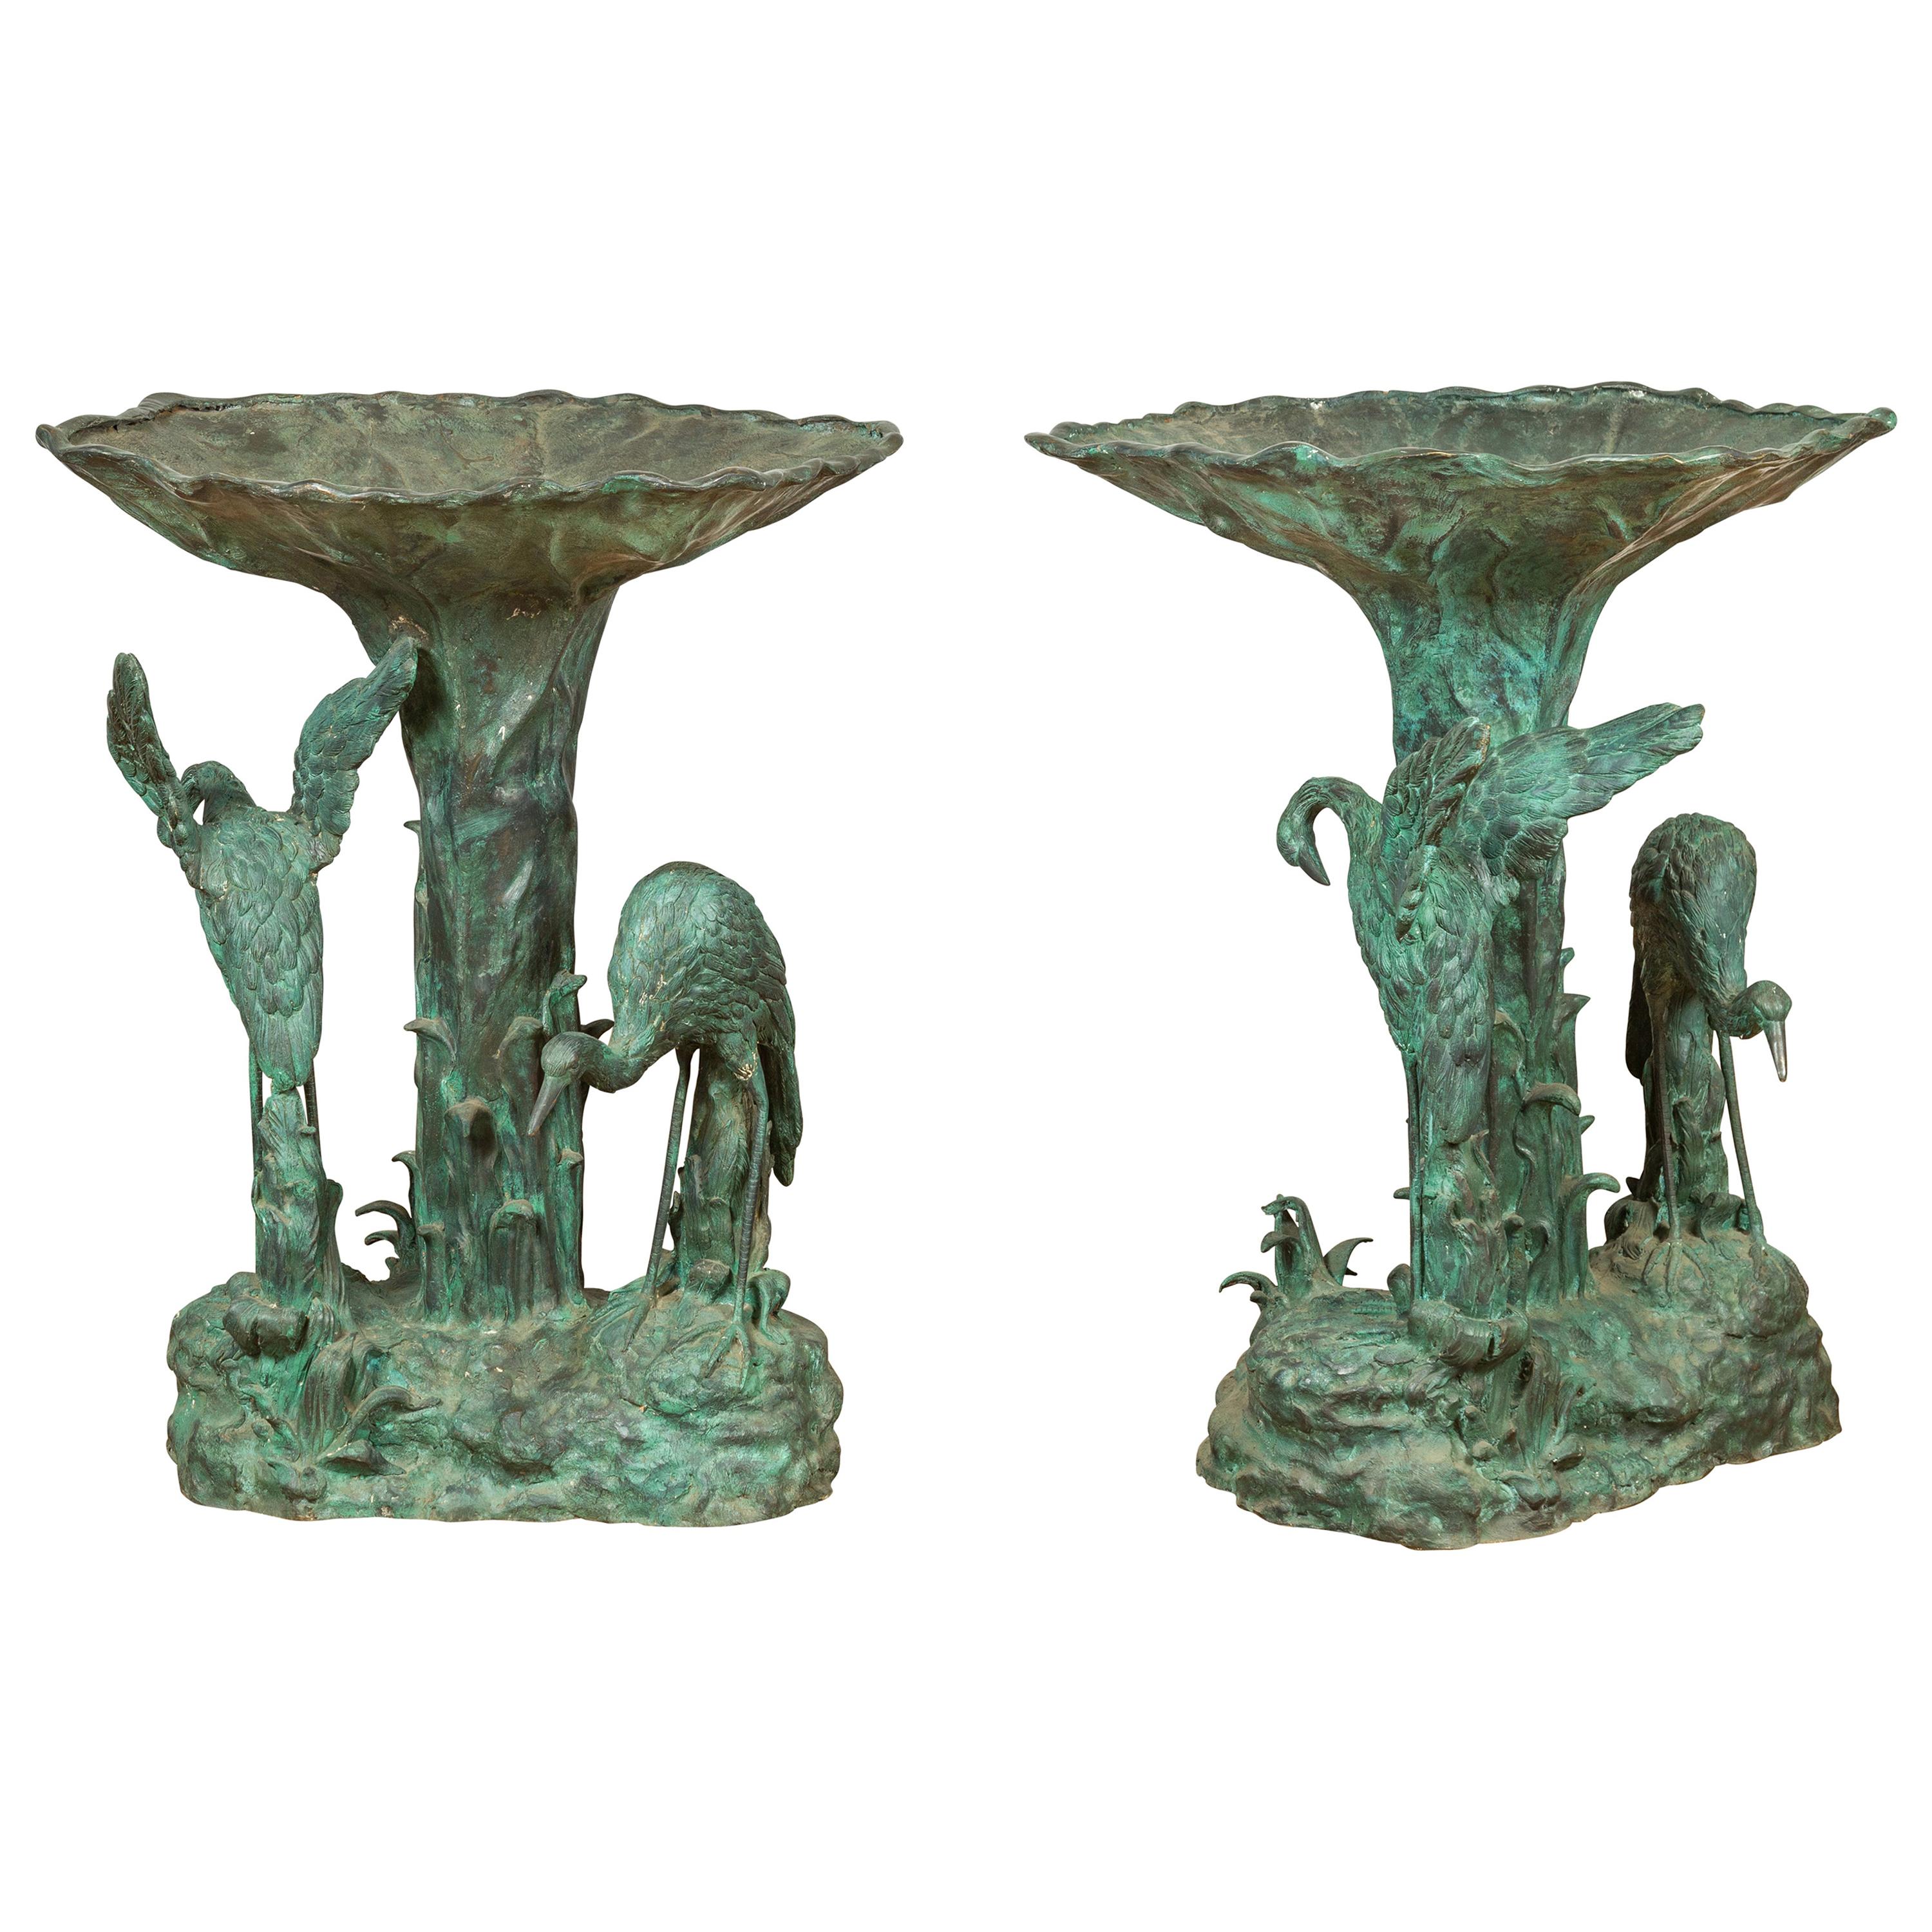 Contemporary Cast Bronze Planter with Cranes and Verdigris Patina, One Available For Sale